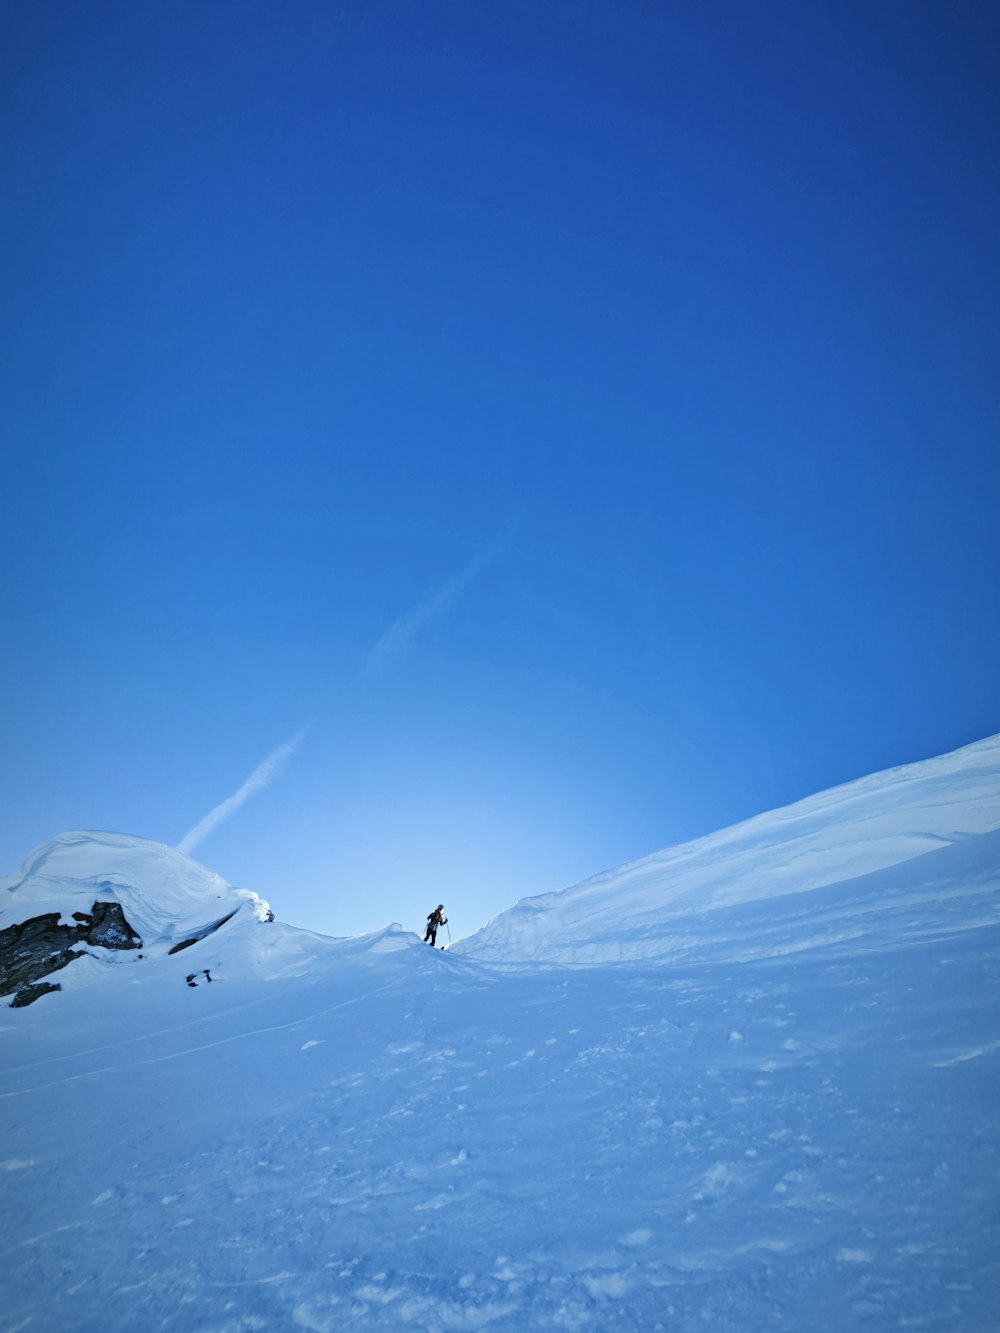 a person is skiing down a snowy hill